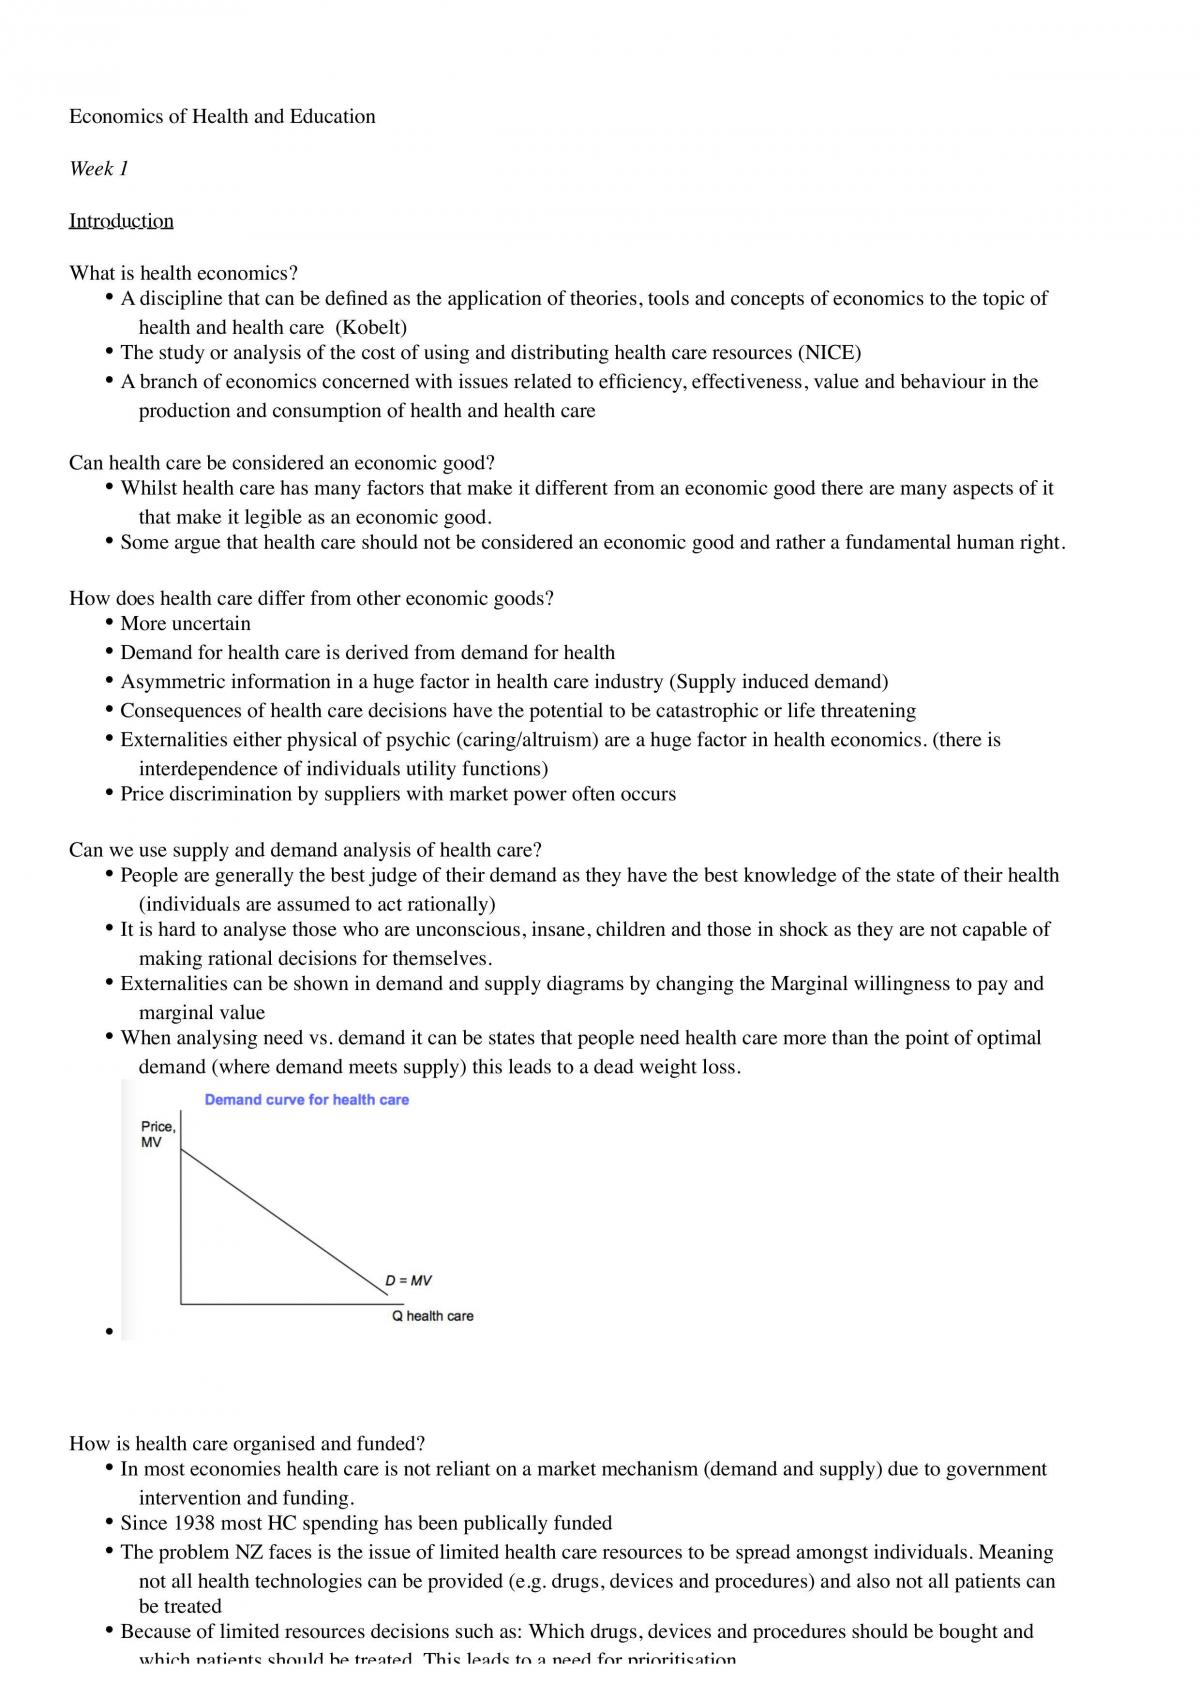 Full Notes for Economics of Health and Education - Page 1